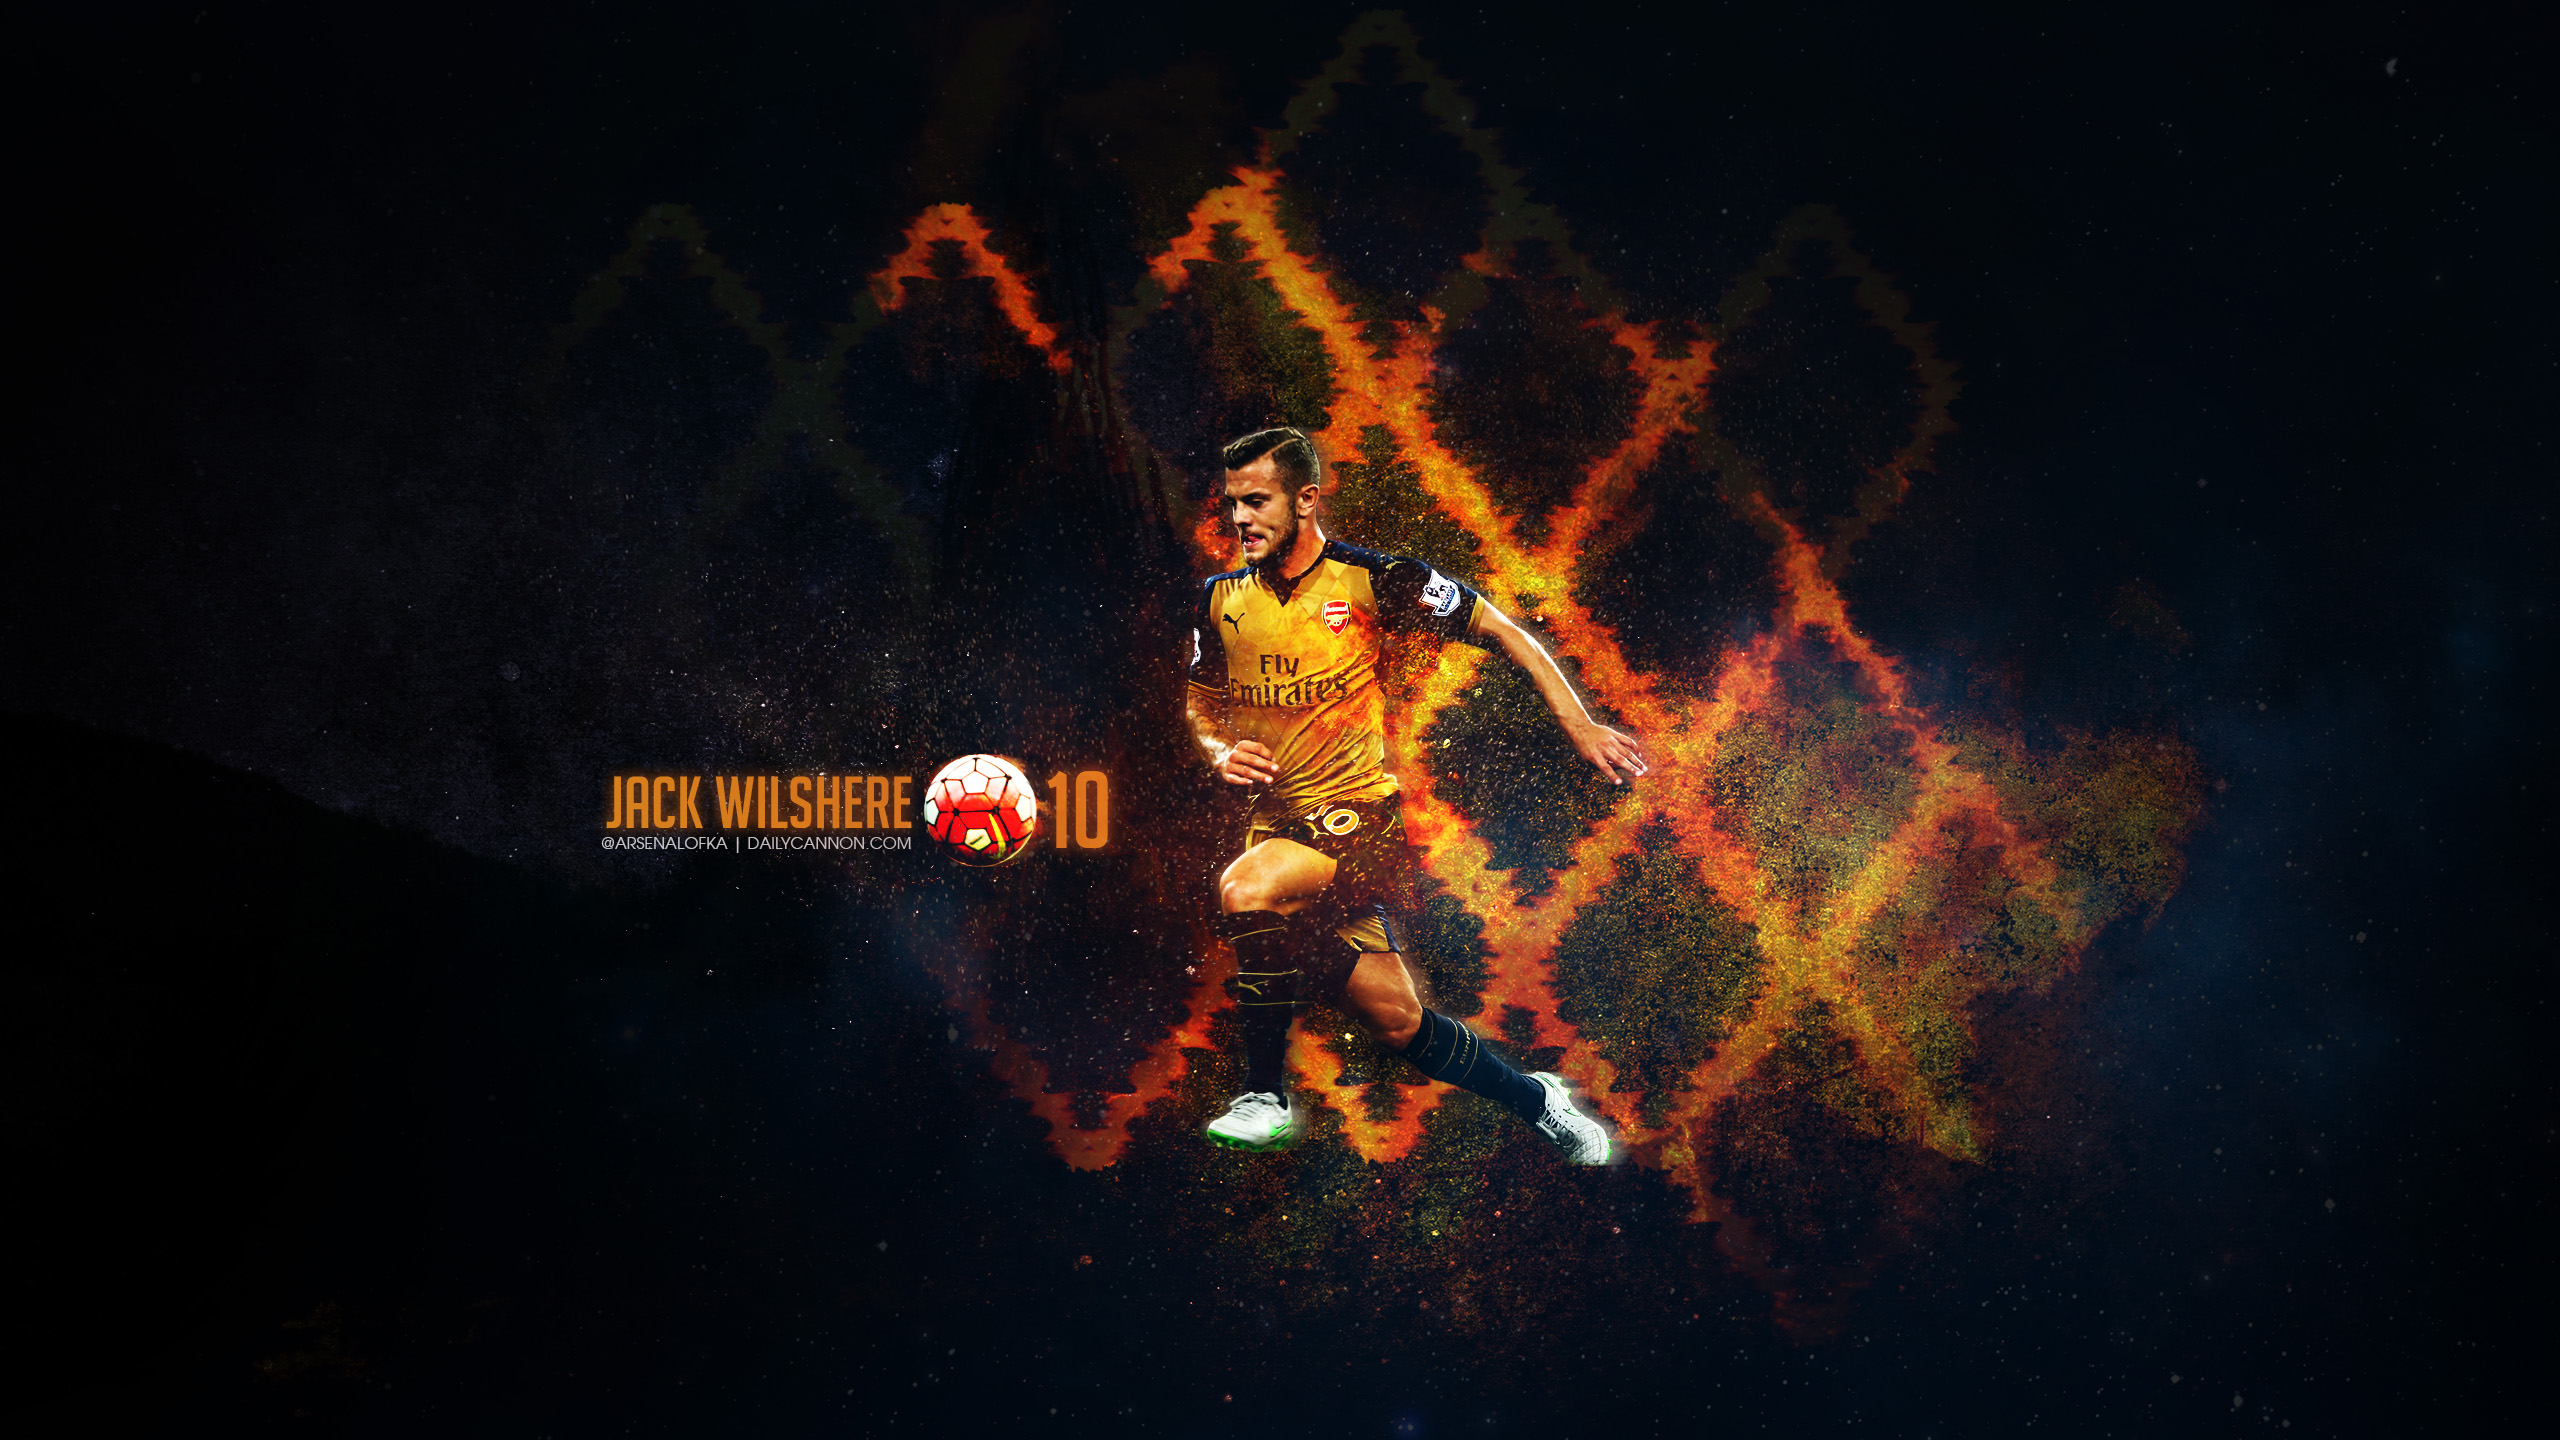 Wallpaper And Covers: Jack Wilshere In New Puma Away Kit